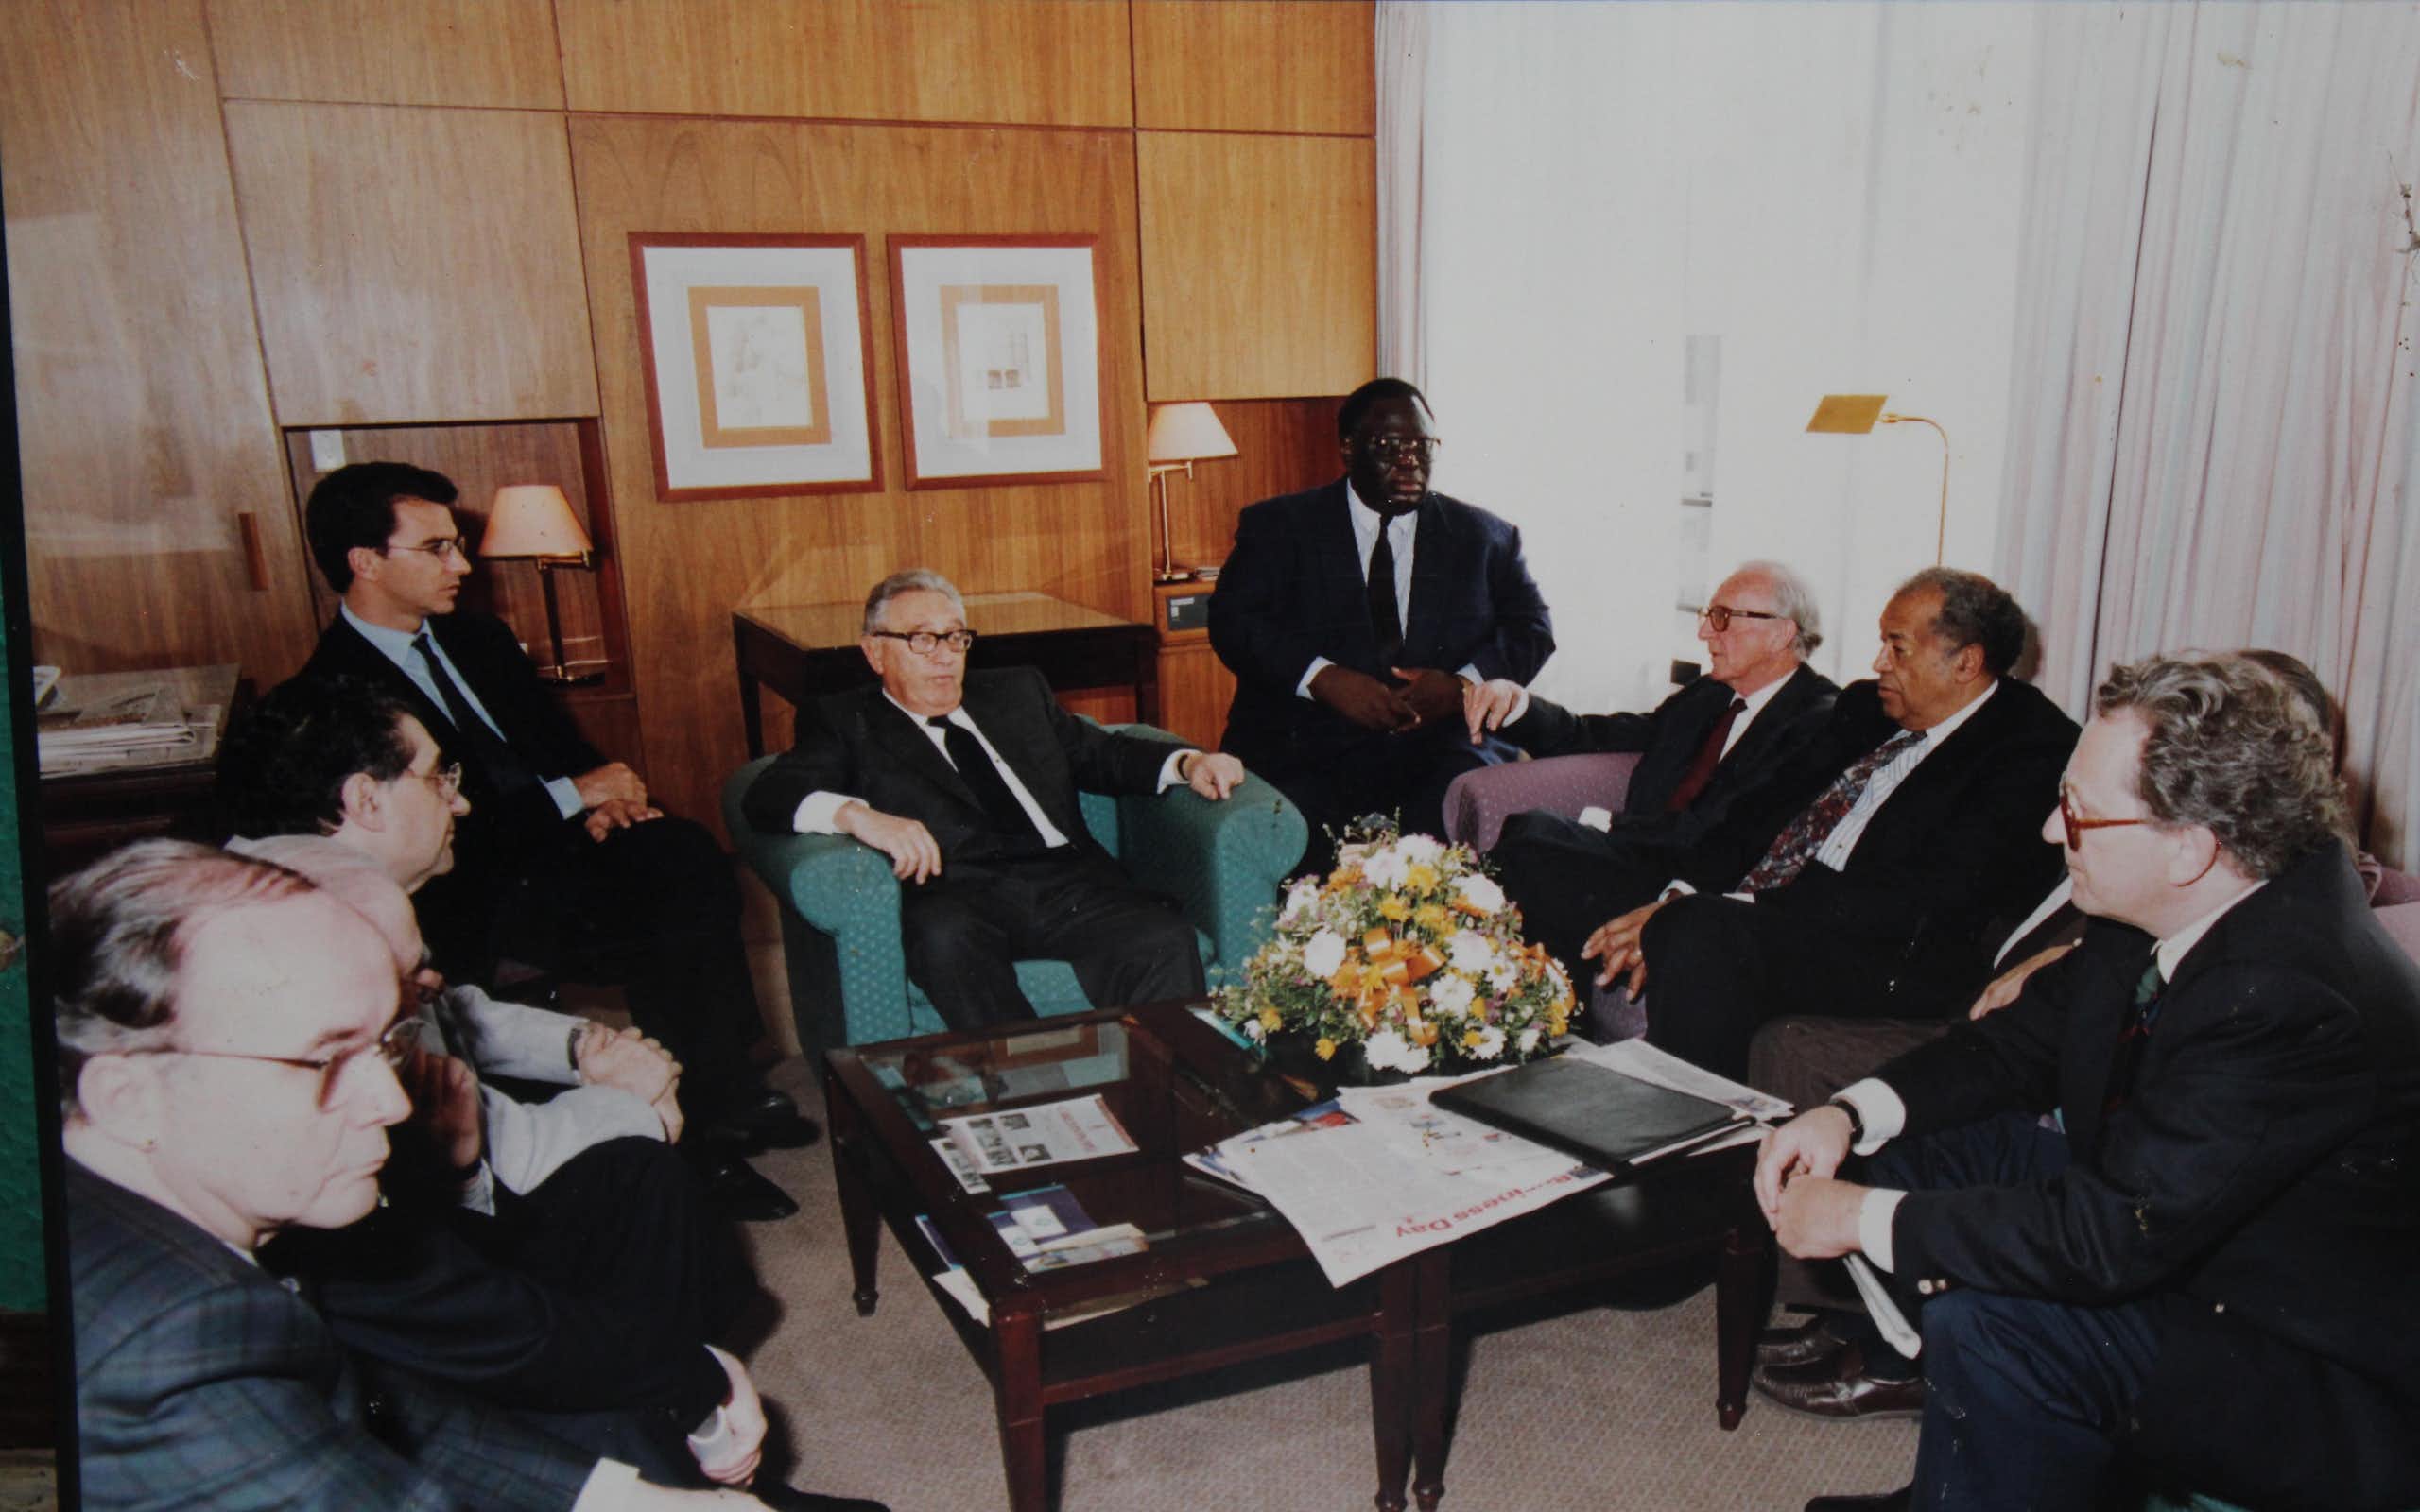 A group of nine men seated in a room with one man at the centre of the room in a U-shape